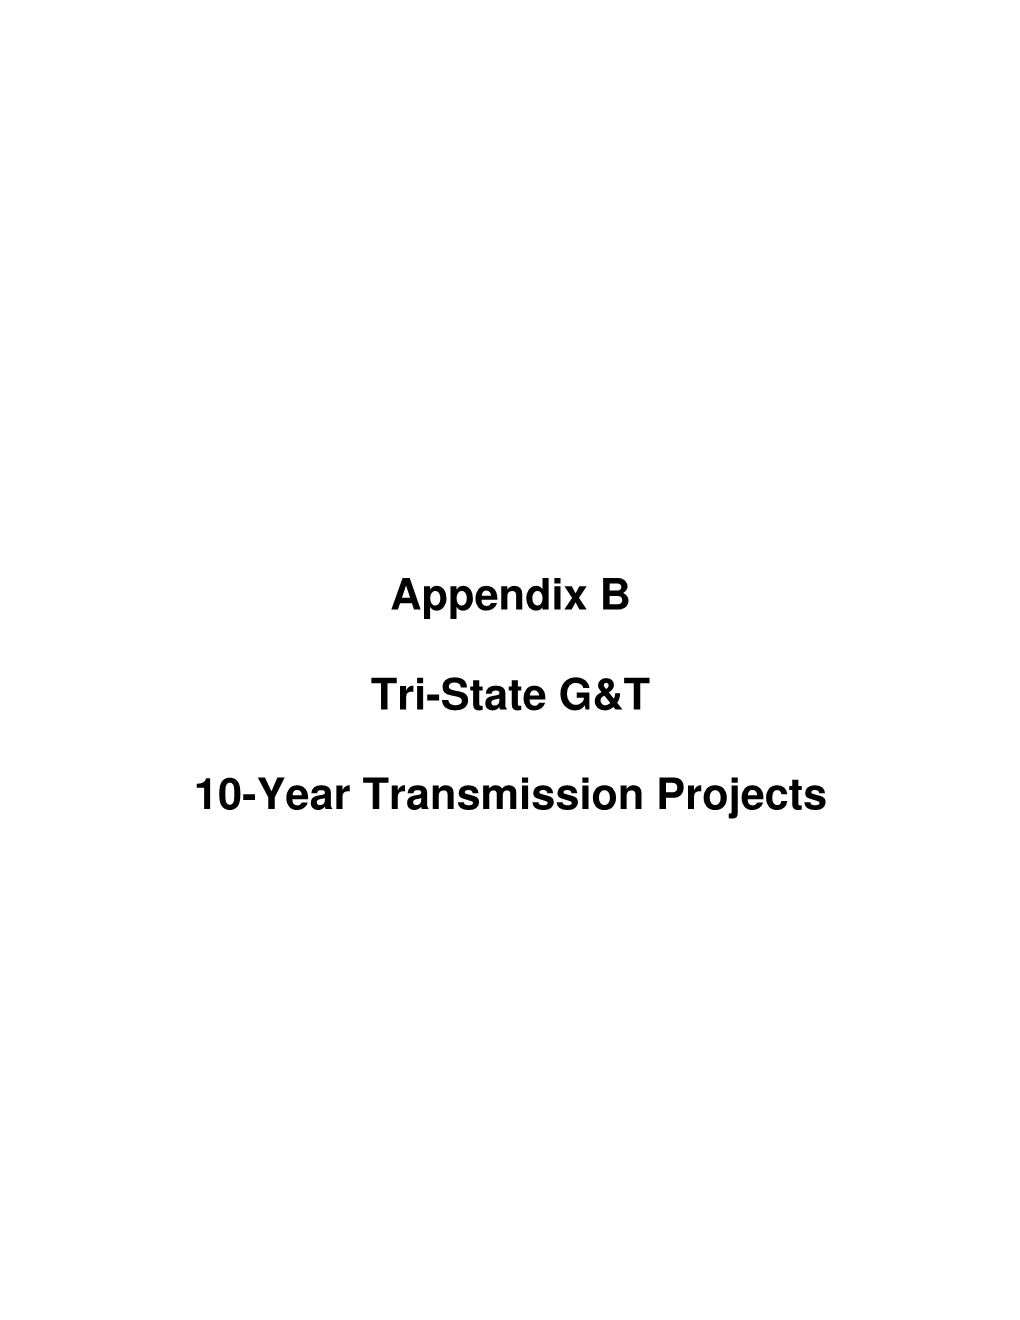 Appendix B Tri-State G&T 10-Year Transmission Projects